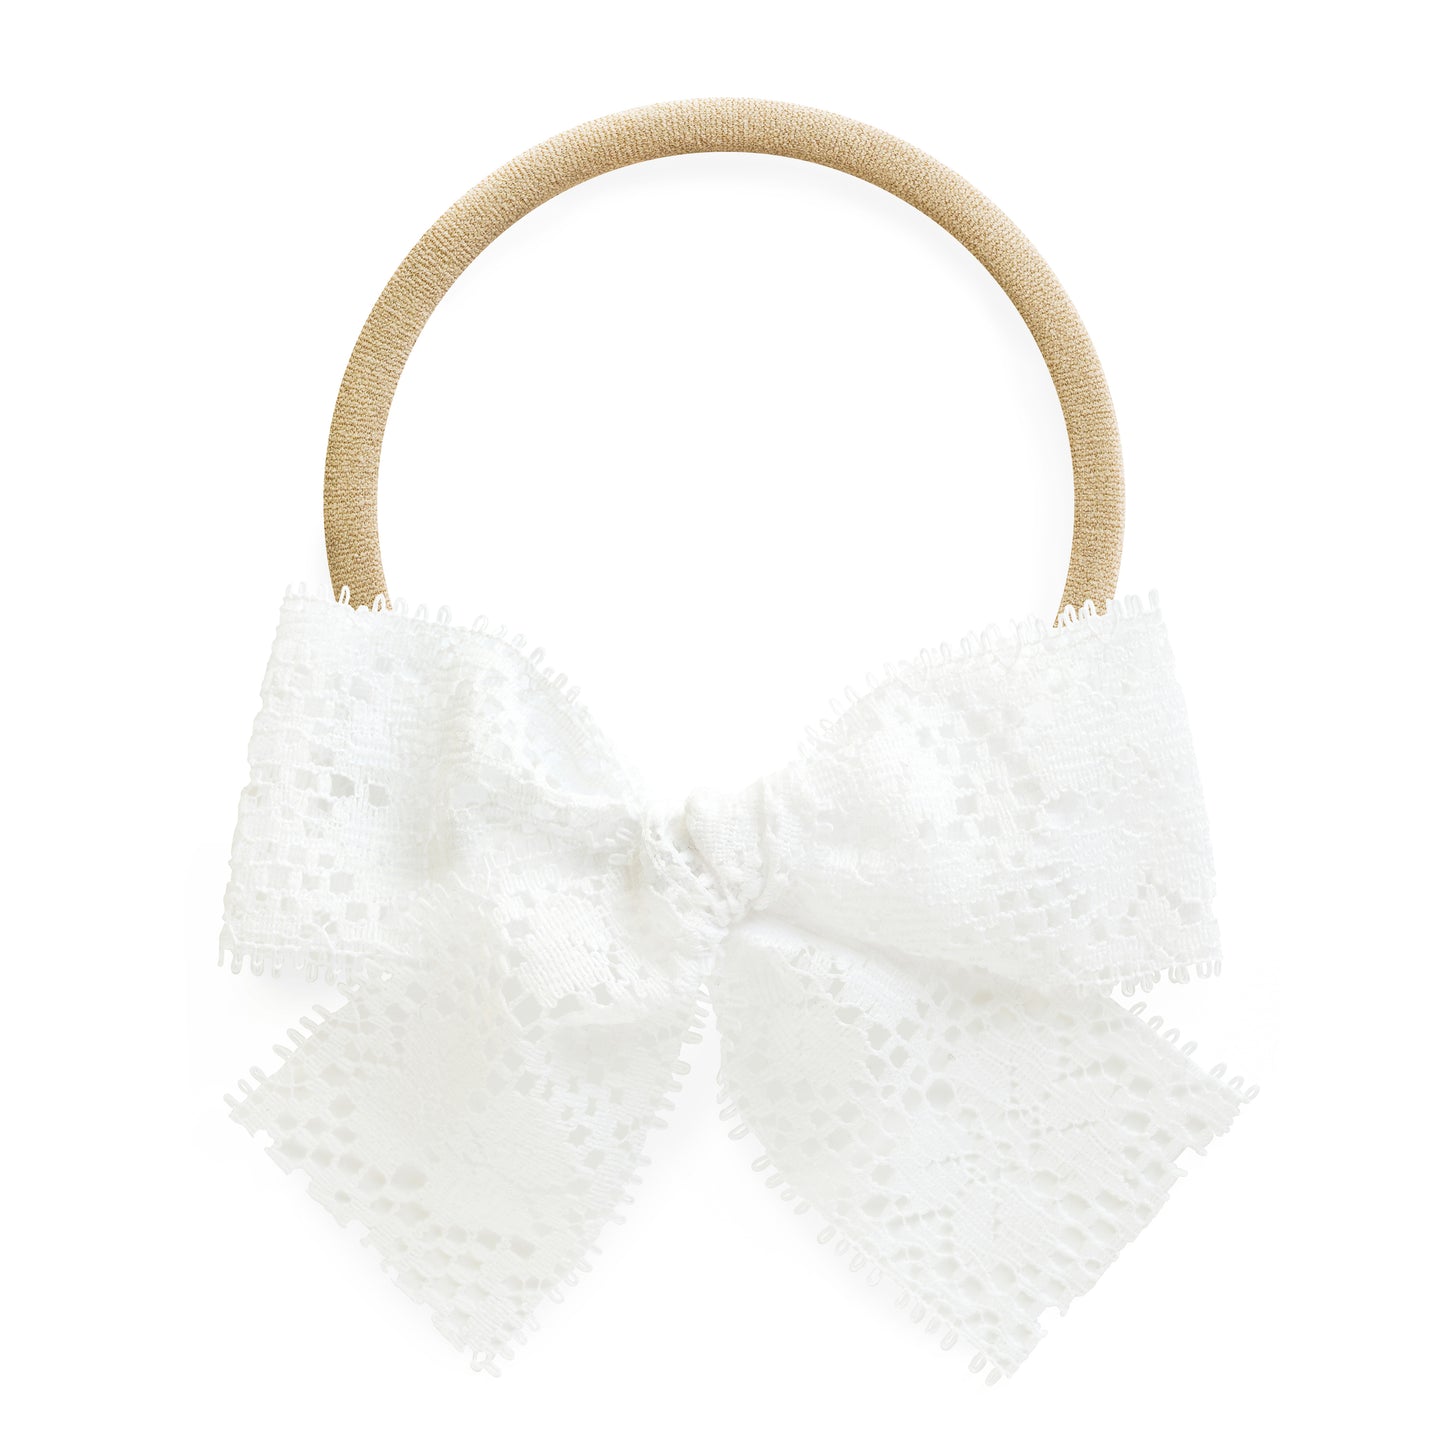 white lace baby headband bow stretchy newborn cute village baby gift